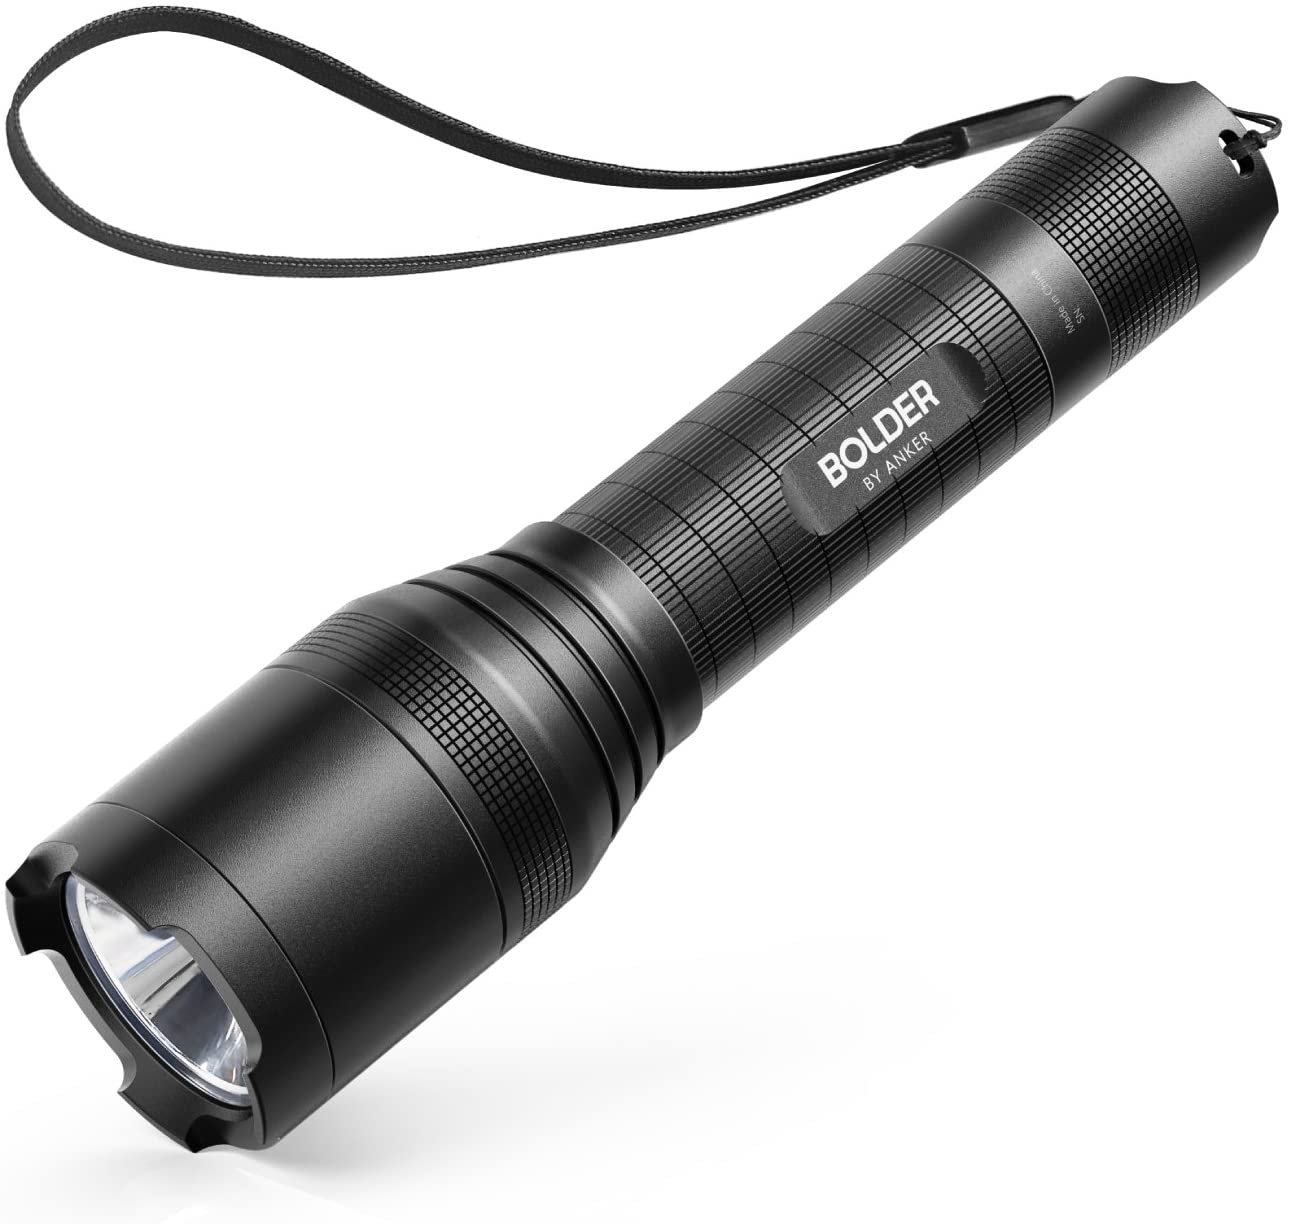 Amazon Prime Members: Anker Super Bright Tactical Flashlight, Rechargeable $21.99 + Free Shipping